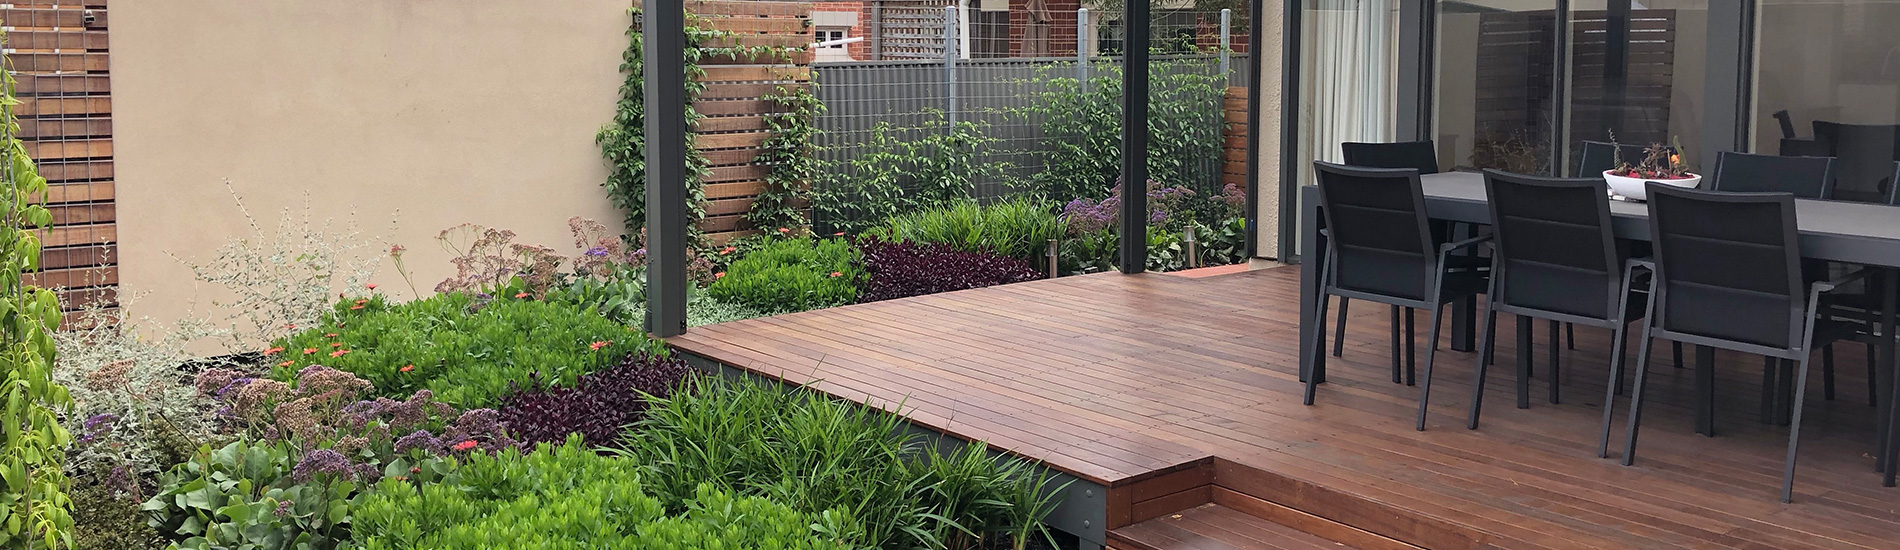 Landscaping Library Adelaide | Hand Made Gardens